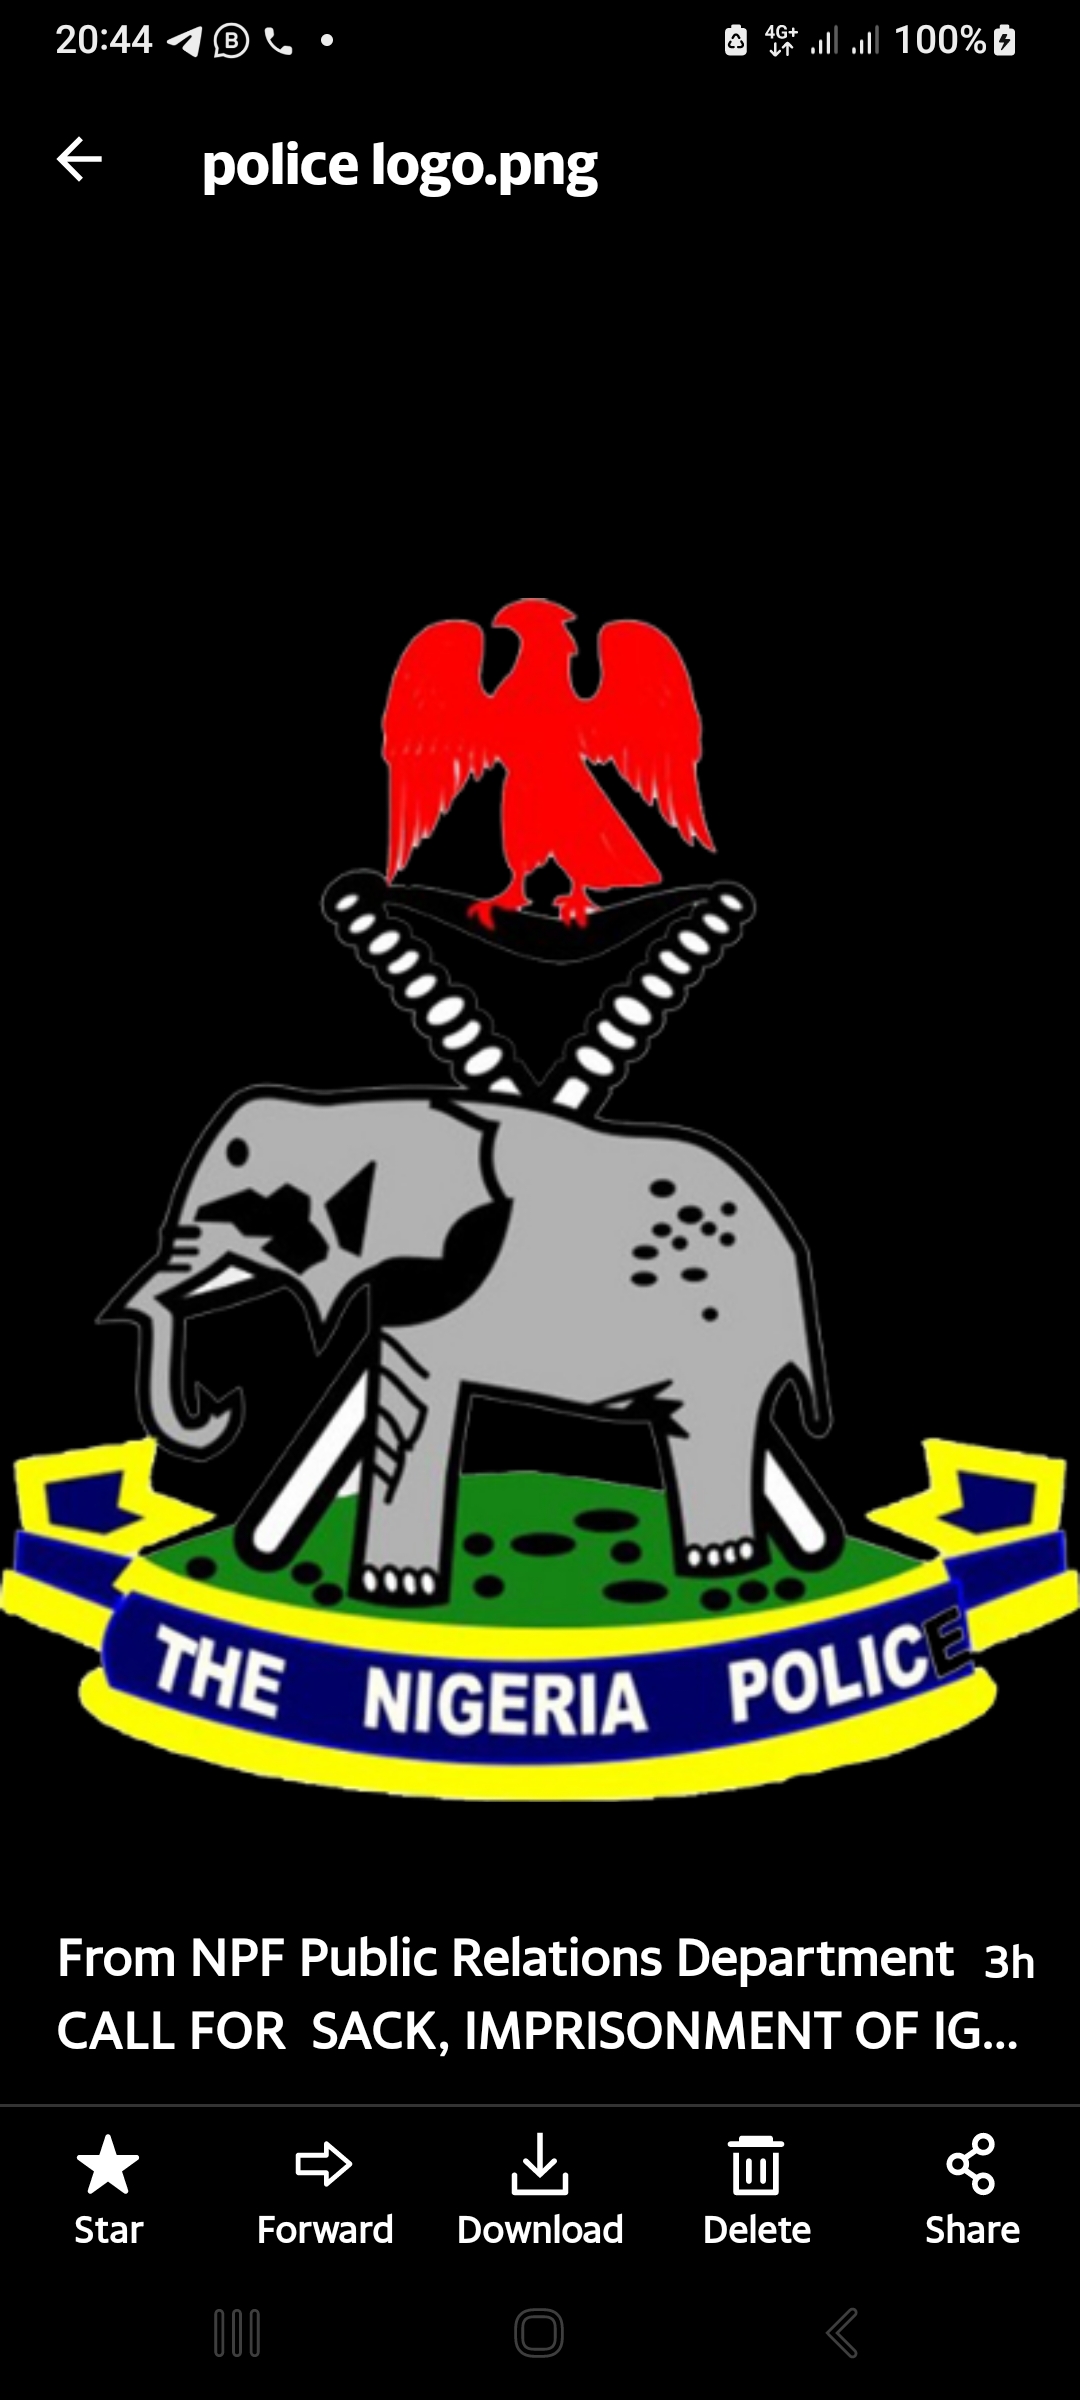 Police Sgt, others arrested over related crime in Lagos